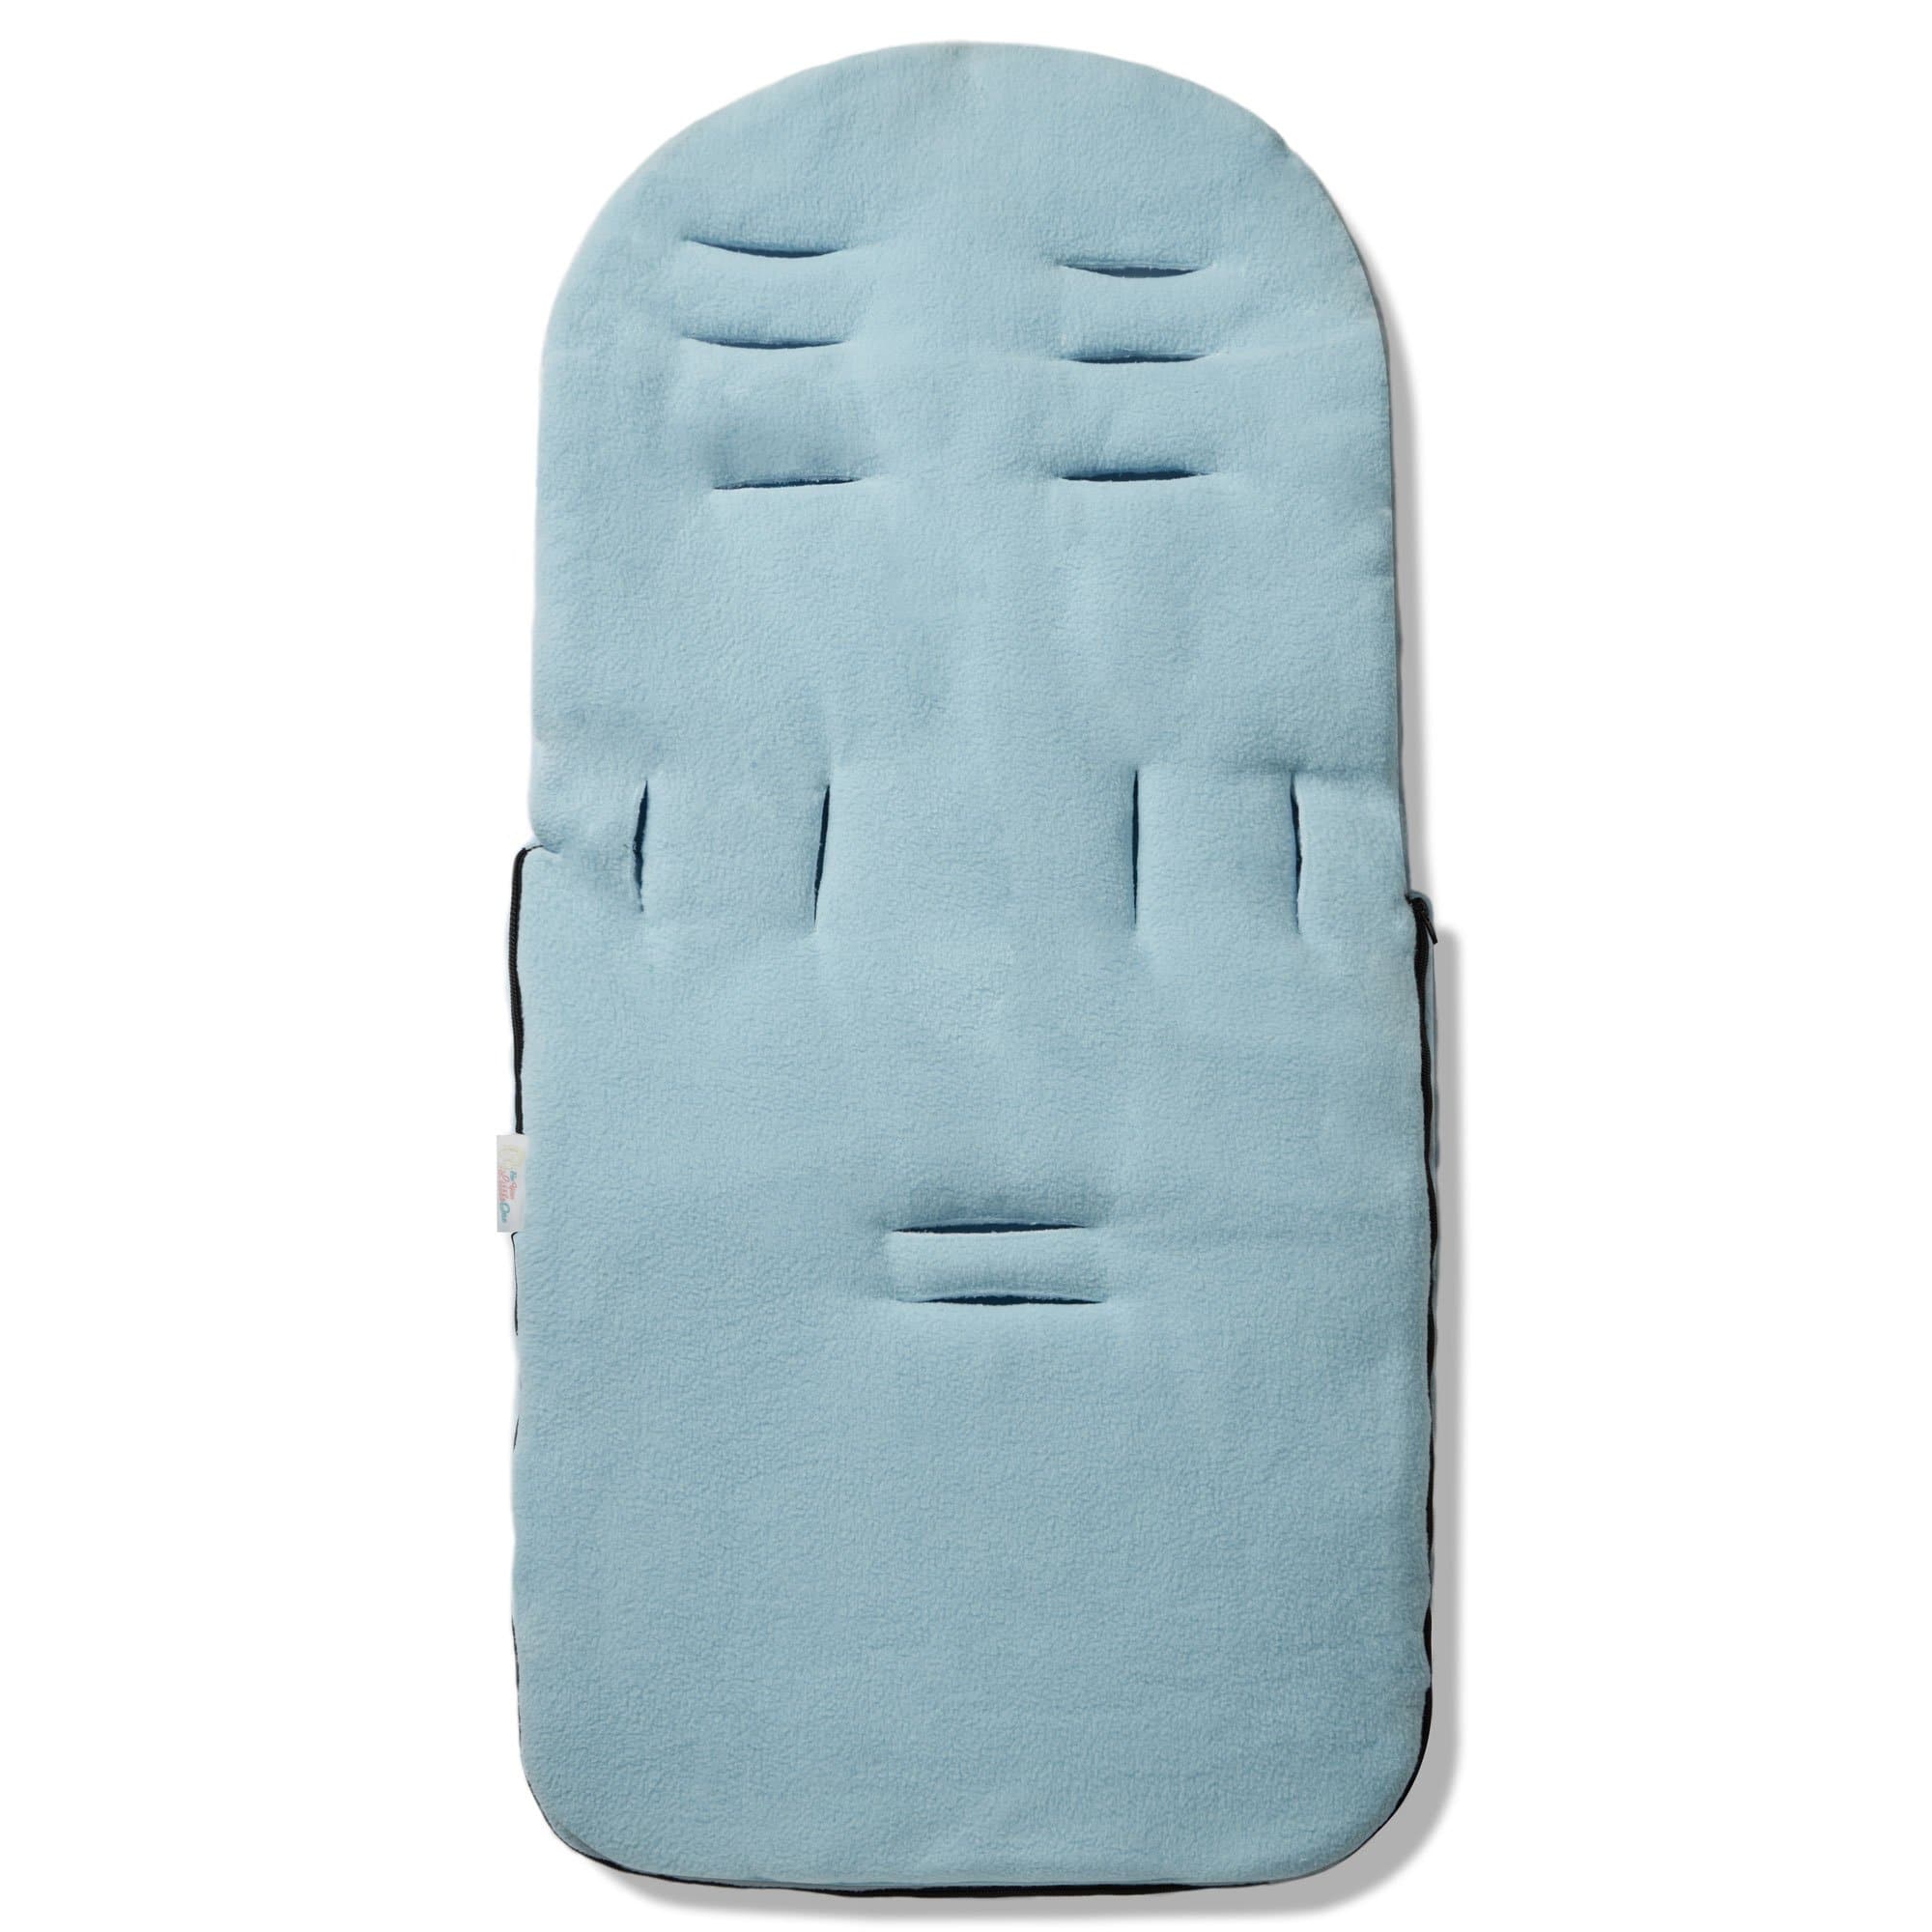 Dimple Footmuff / Cosy Toes Compatible with DoBuggy - For Your Little One